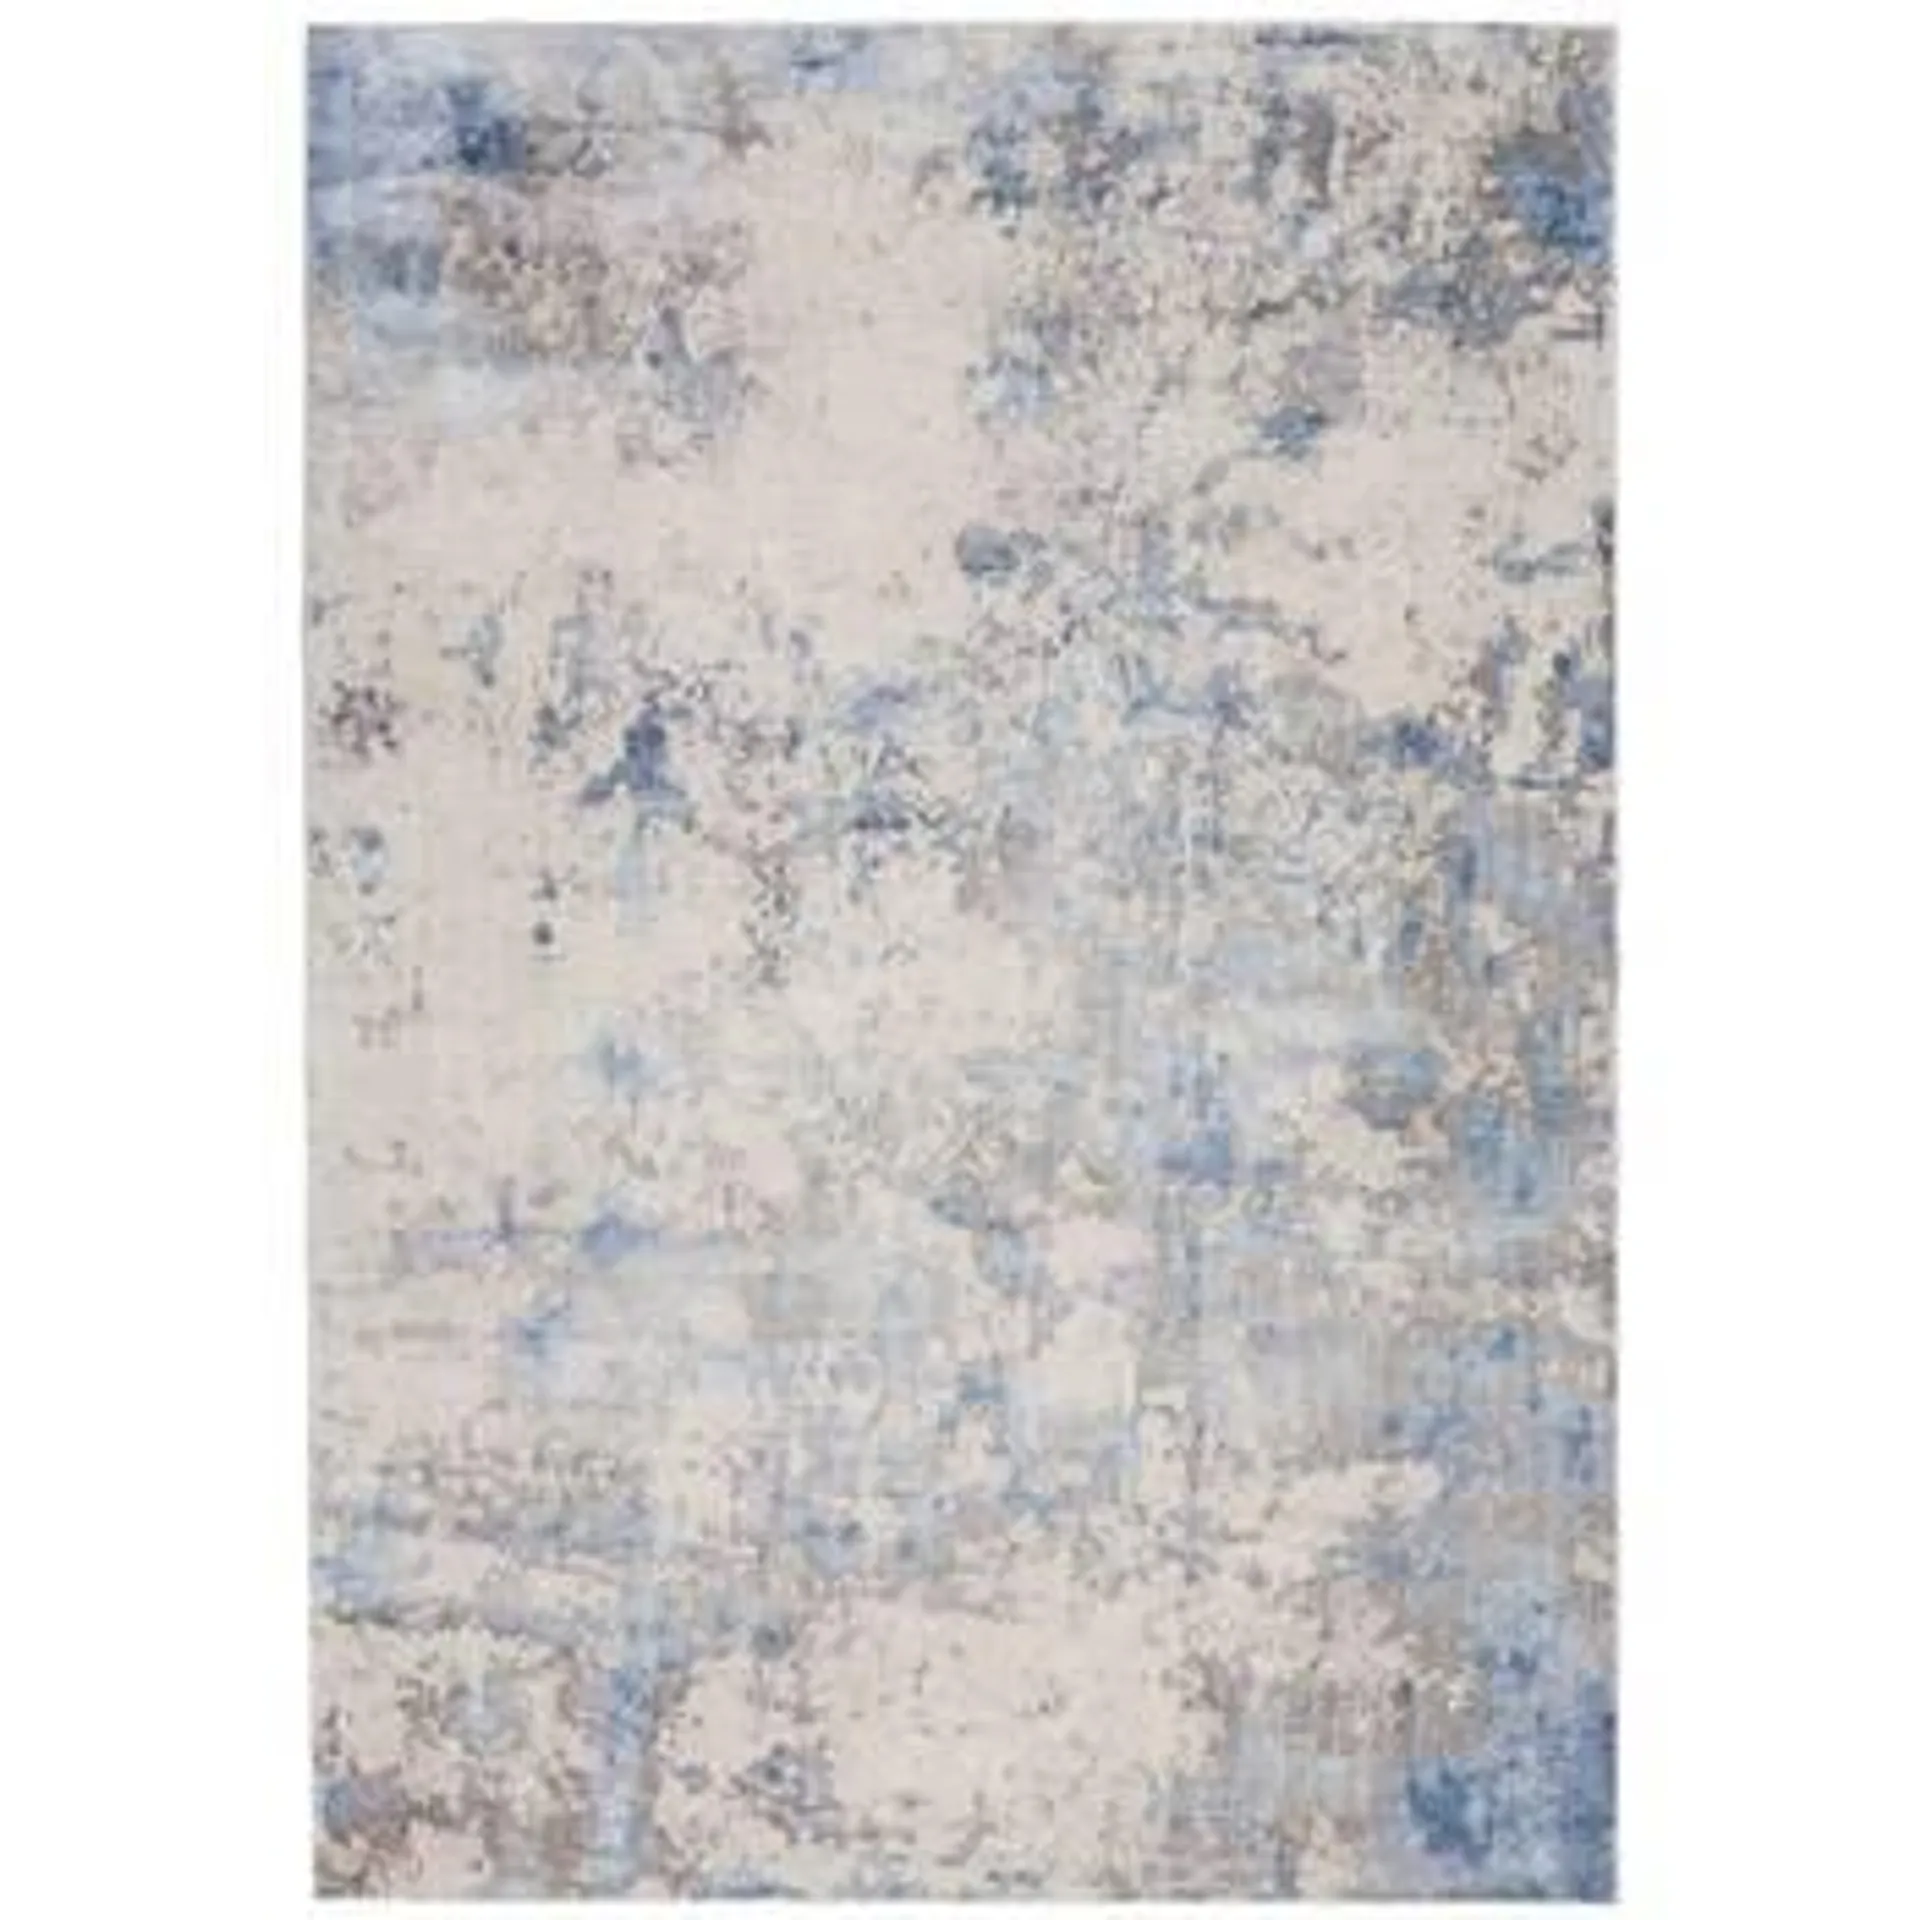 Silky Textures Blue Shimmer Rug in 2 Sizes